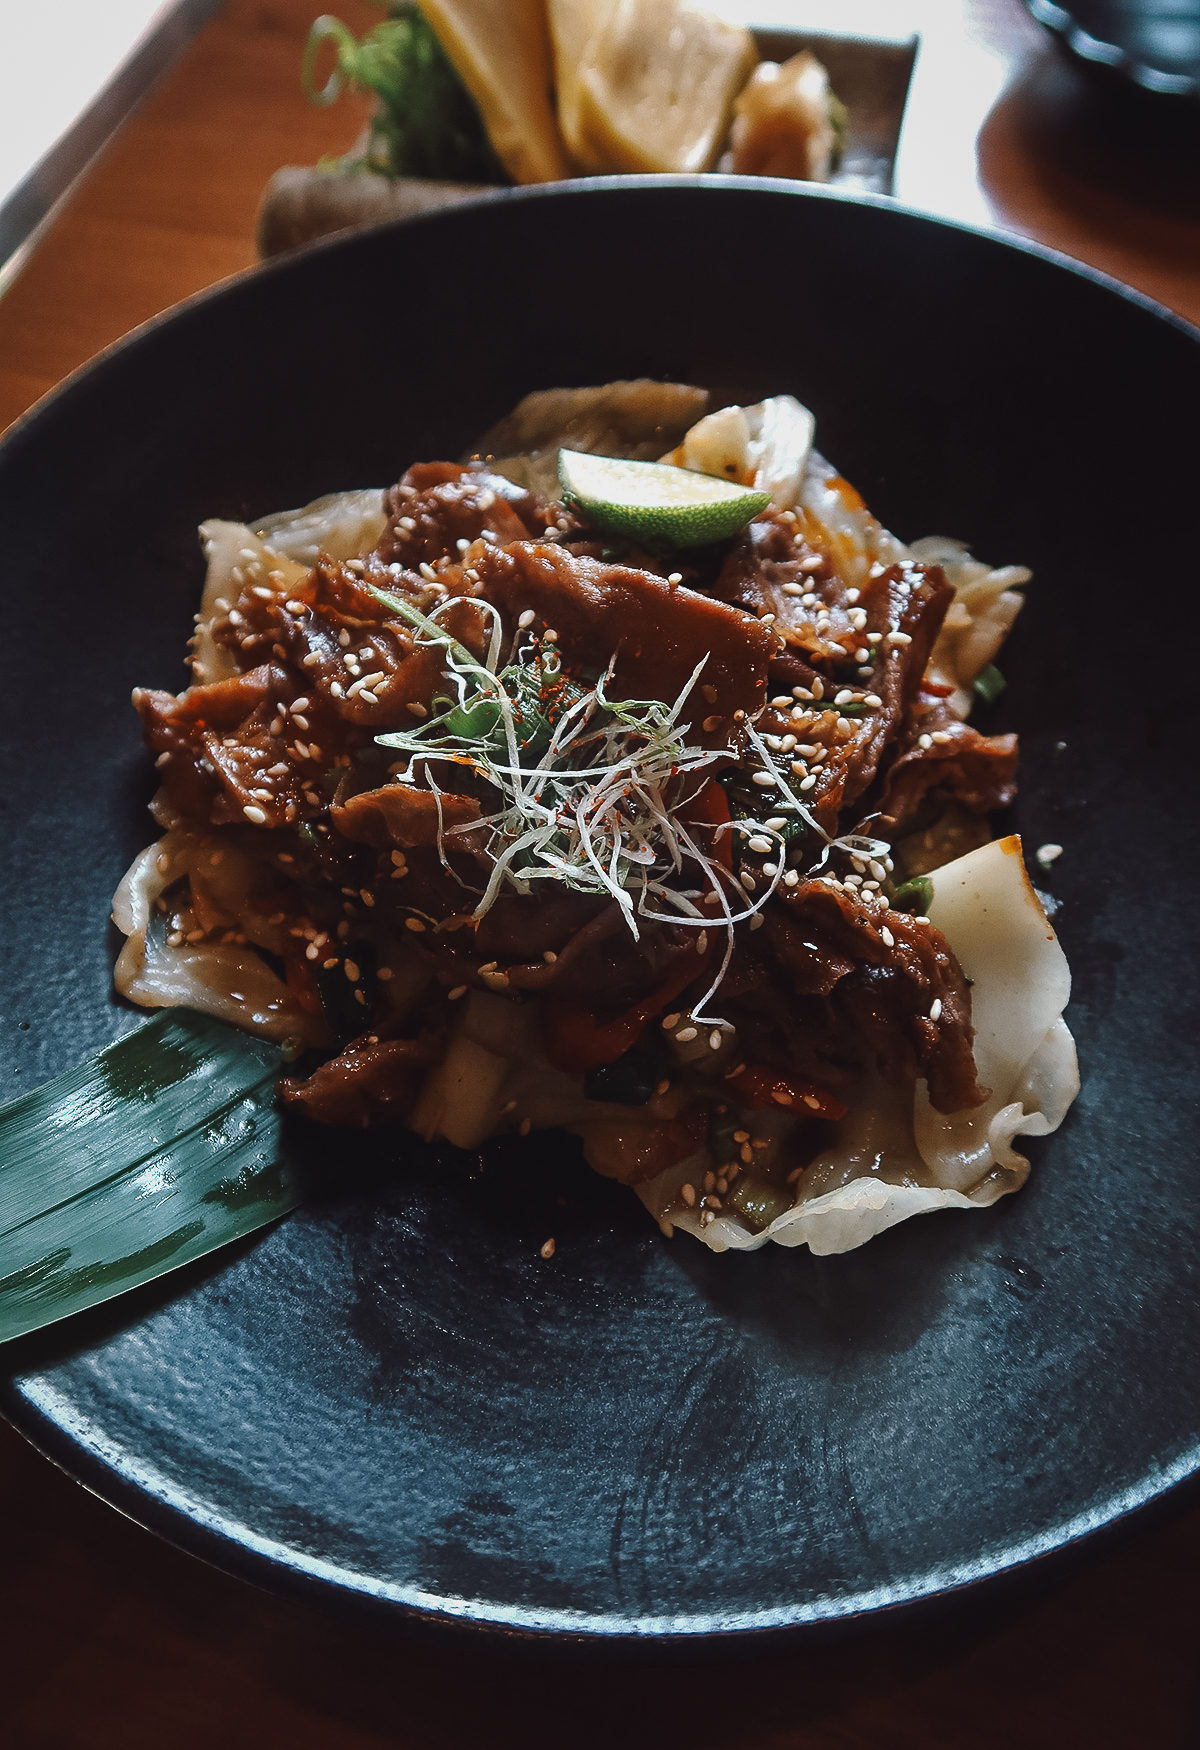 Beef dish at a restaurant in Ubud